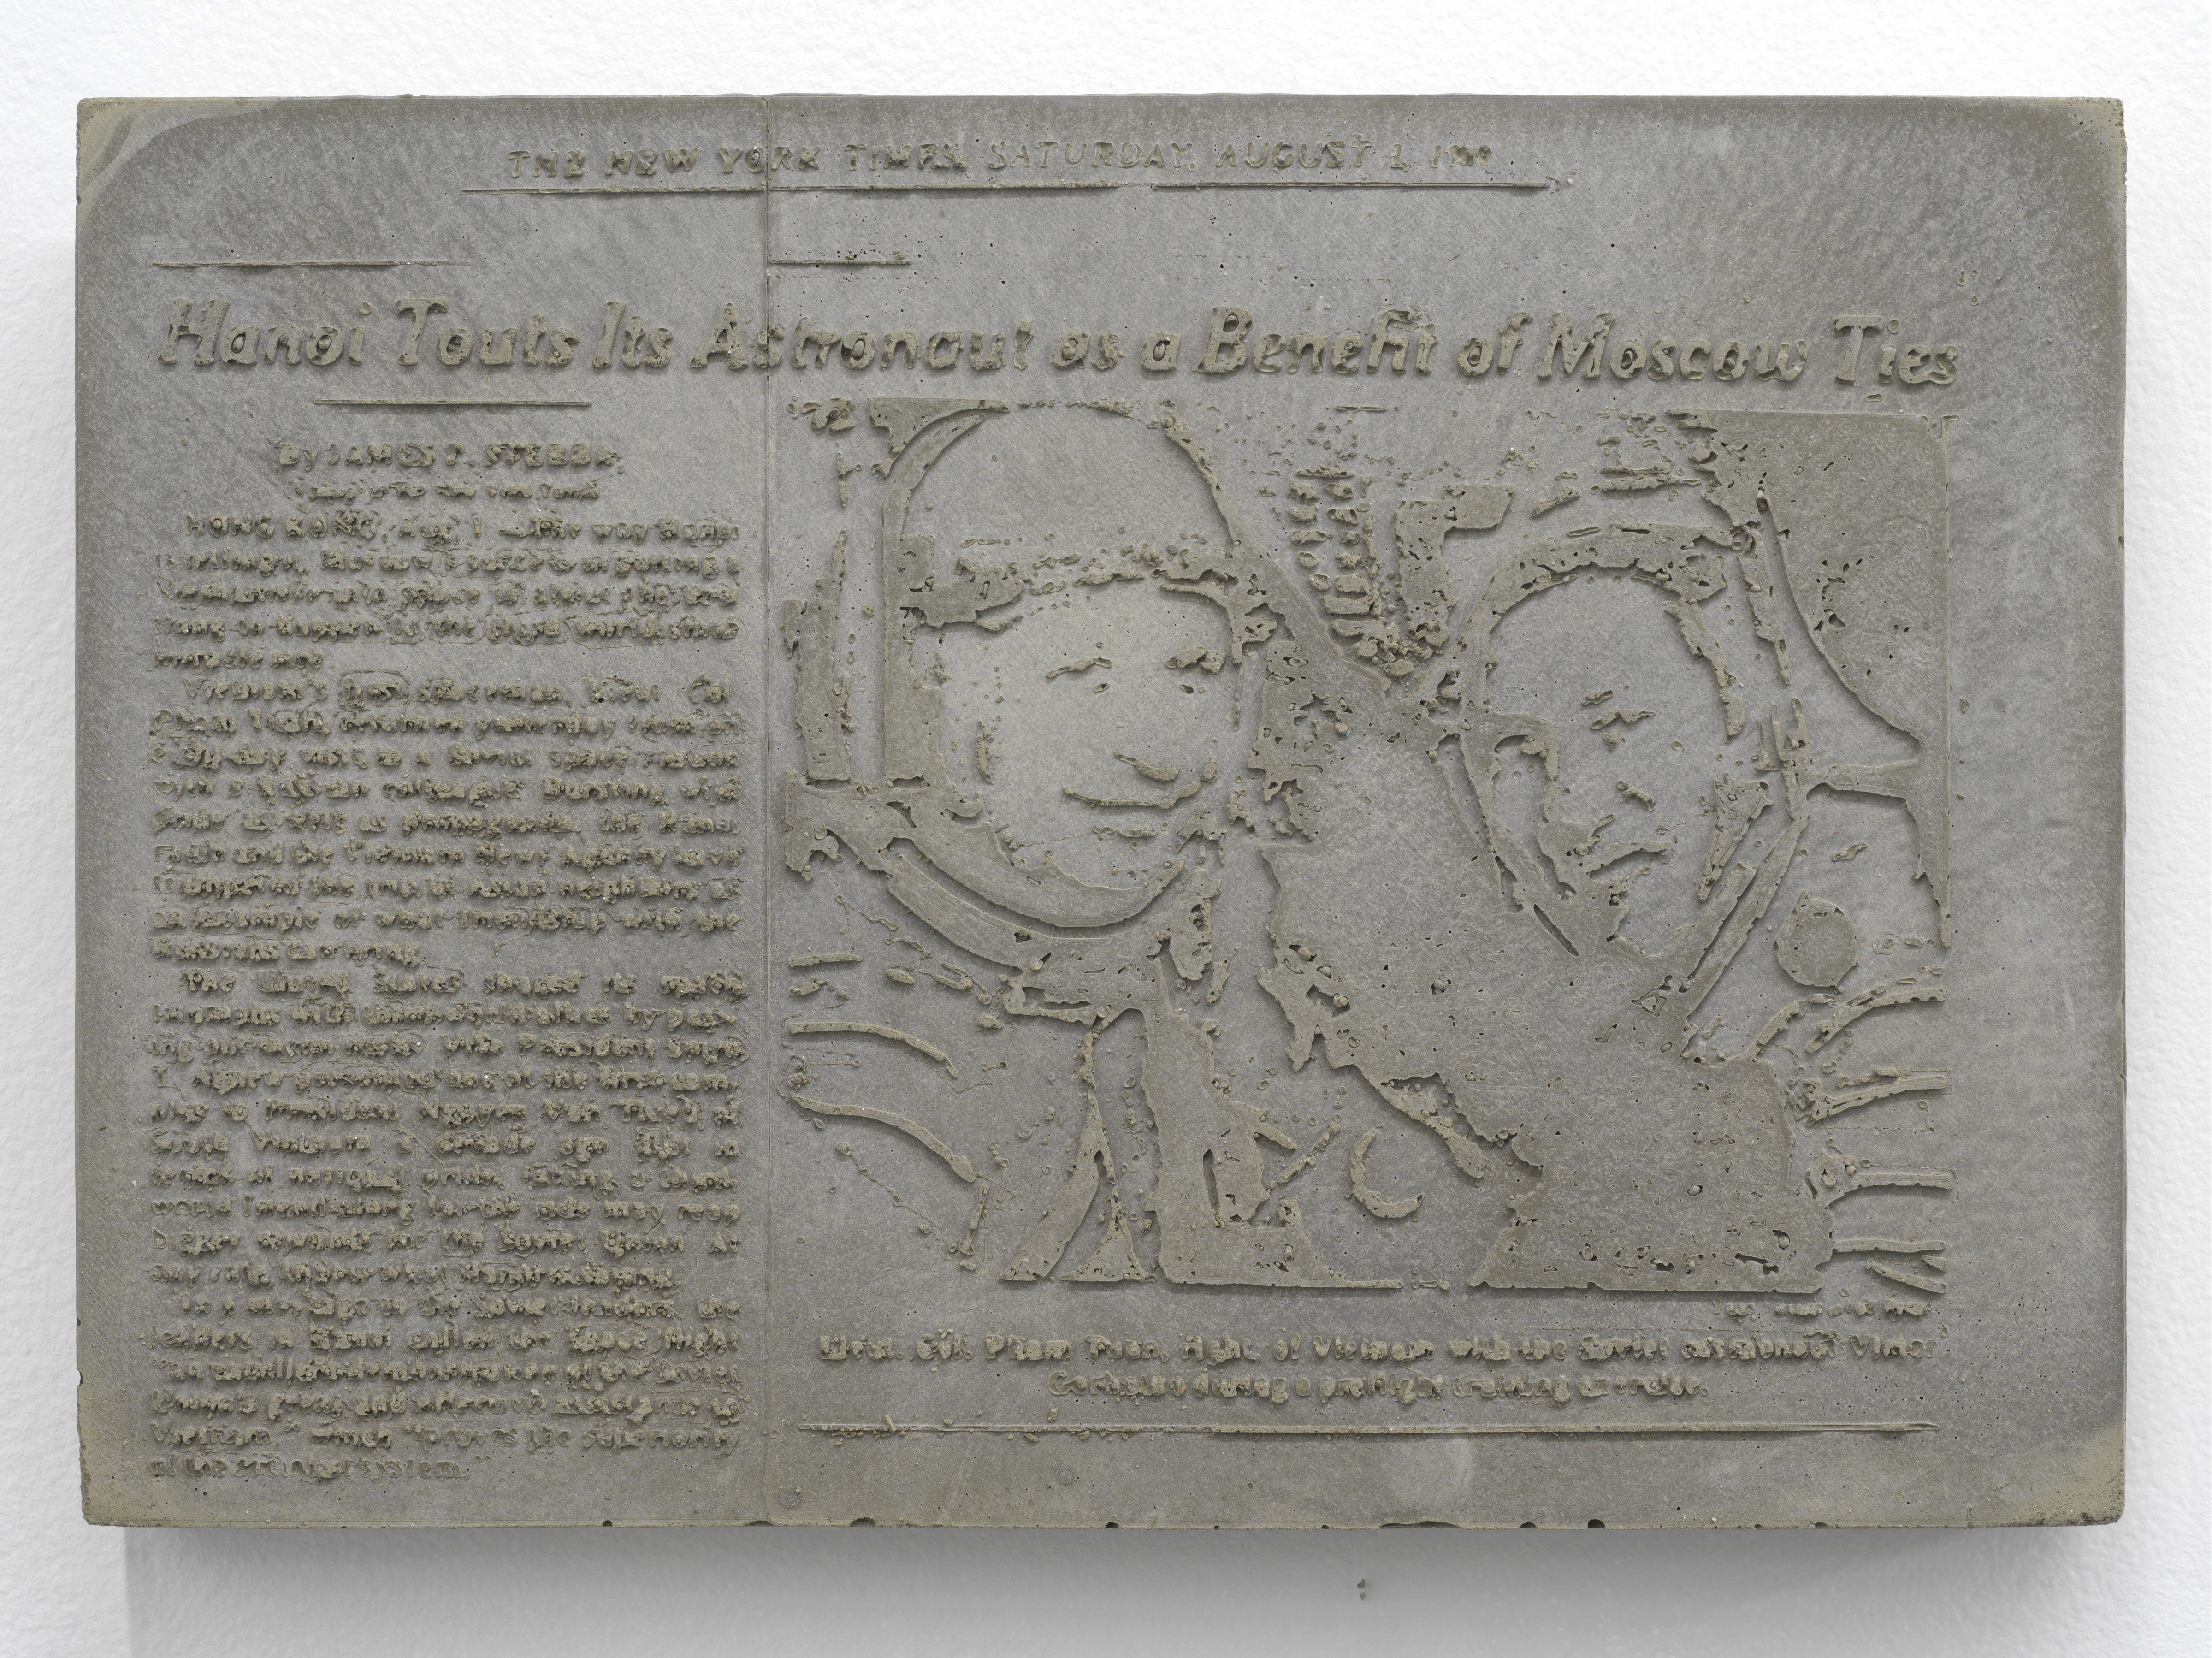 Image: Photo of a newspaper article from the New York Times cast in concrete. The headline reads, “Hanoi touts its astronaut as a benefit of Moscow ties,” The article shows an image of two astronauts wearing space suits and smiling. Image courtesy of the artist.